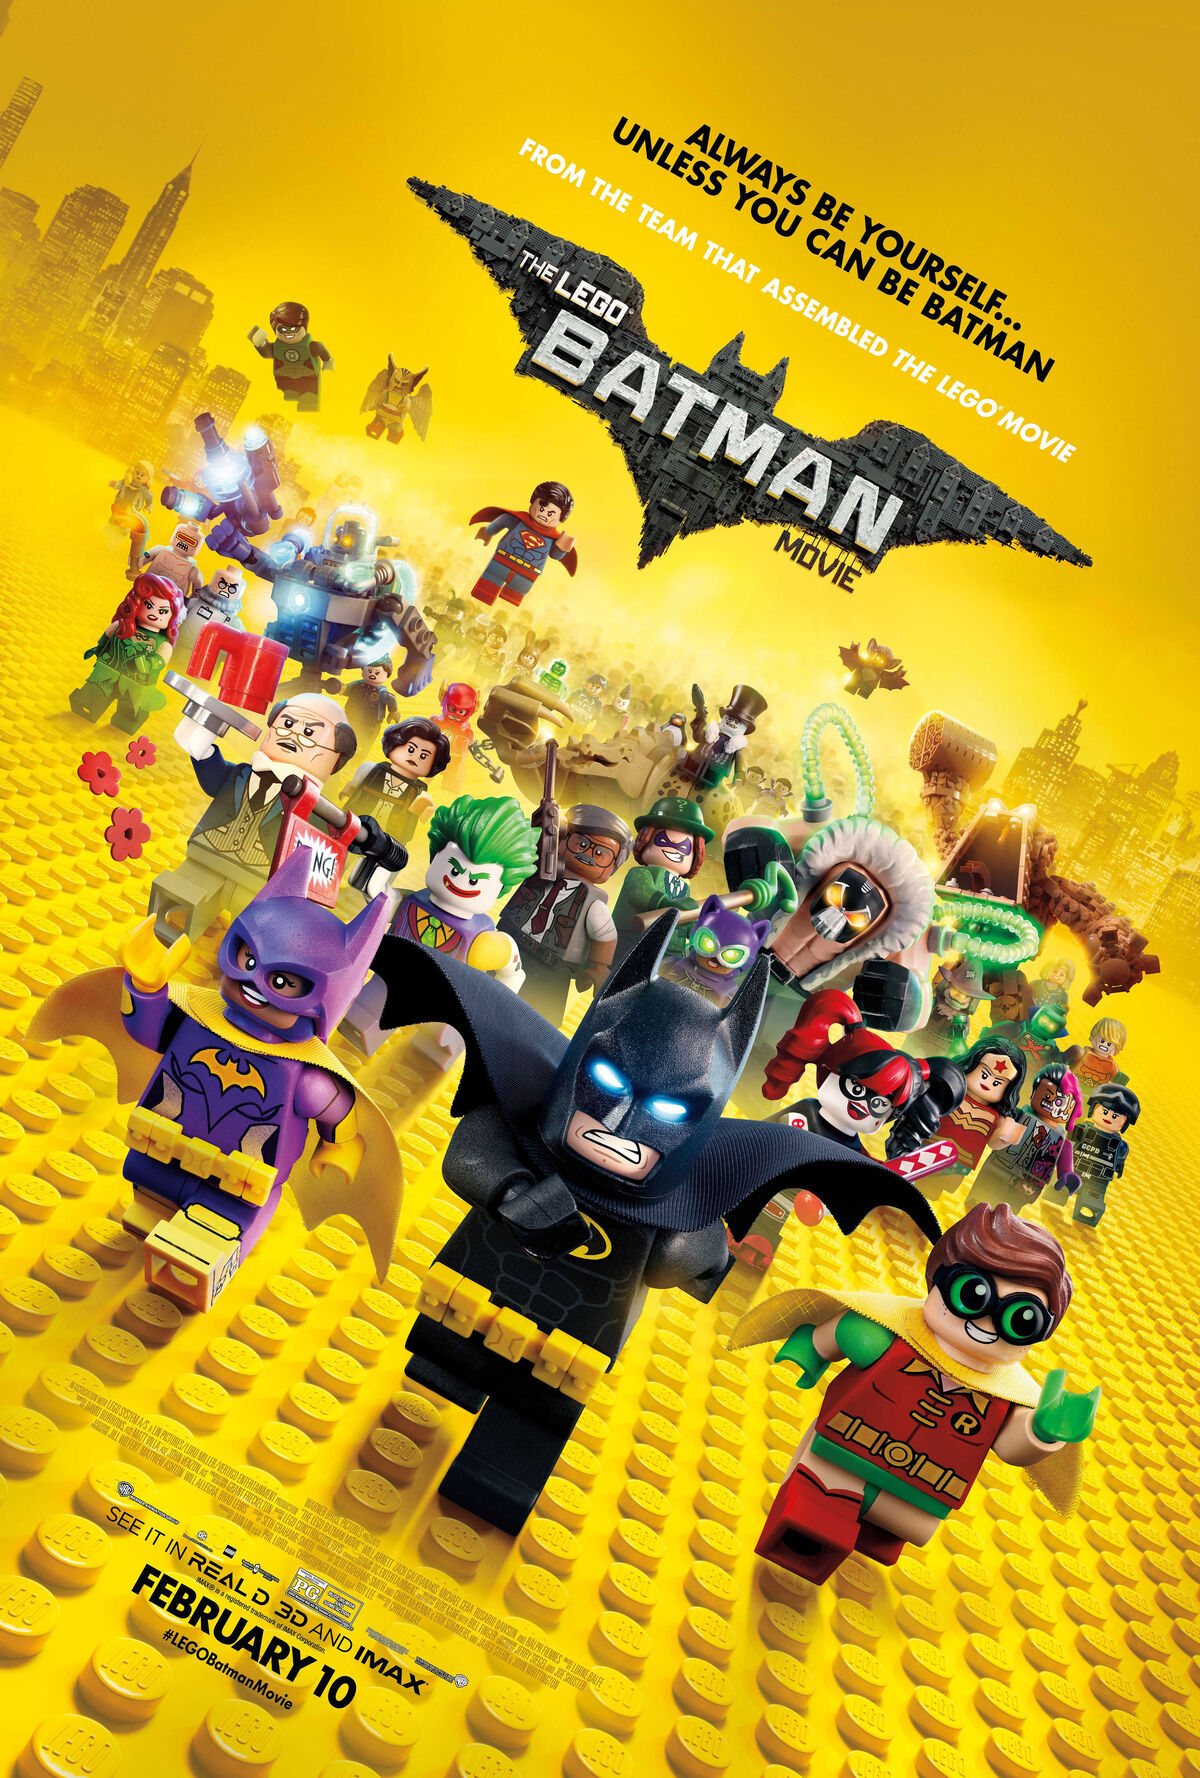 The LEGO Batman Movie - The LEGO Batman Movie Character Sculpture  Theatrical Display